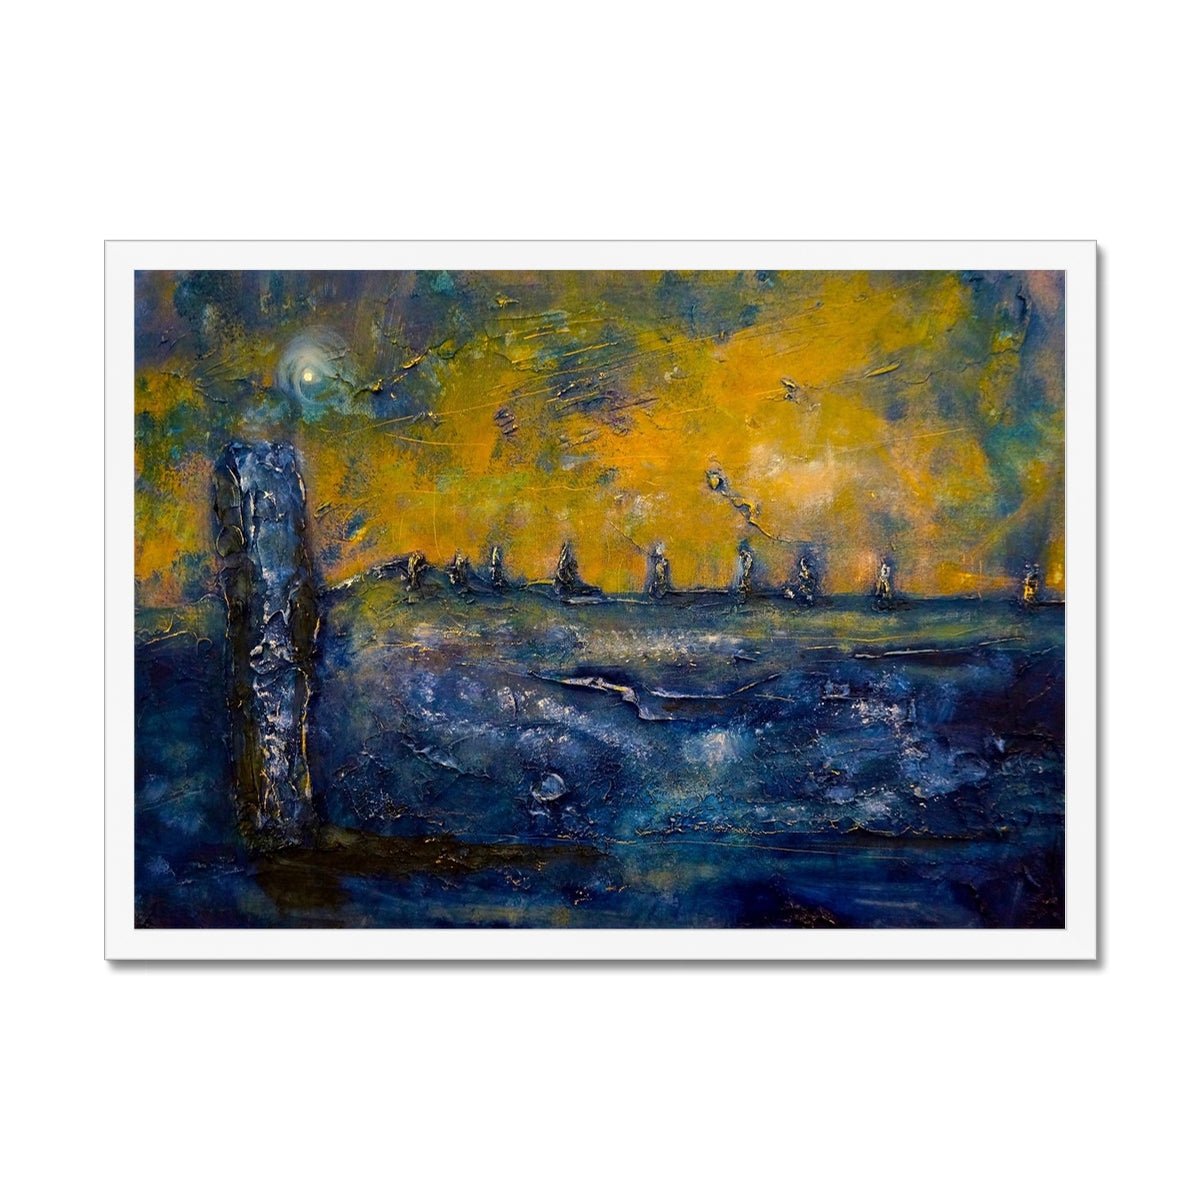 Brodgar Moonlight Orkney Painting | Framed Prints From Scotland-Framed Prints-Orkney Art Gallery-A2 Landscape-White Frame-Paintings, Prints, Homeware, Art Gifts From Scotland By Scottish Artist Kevin Hunter